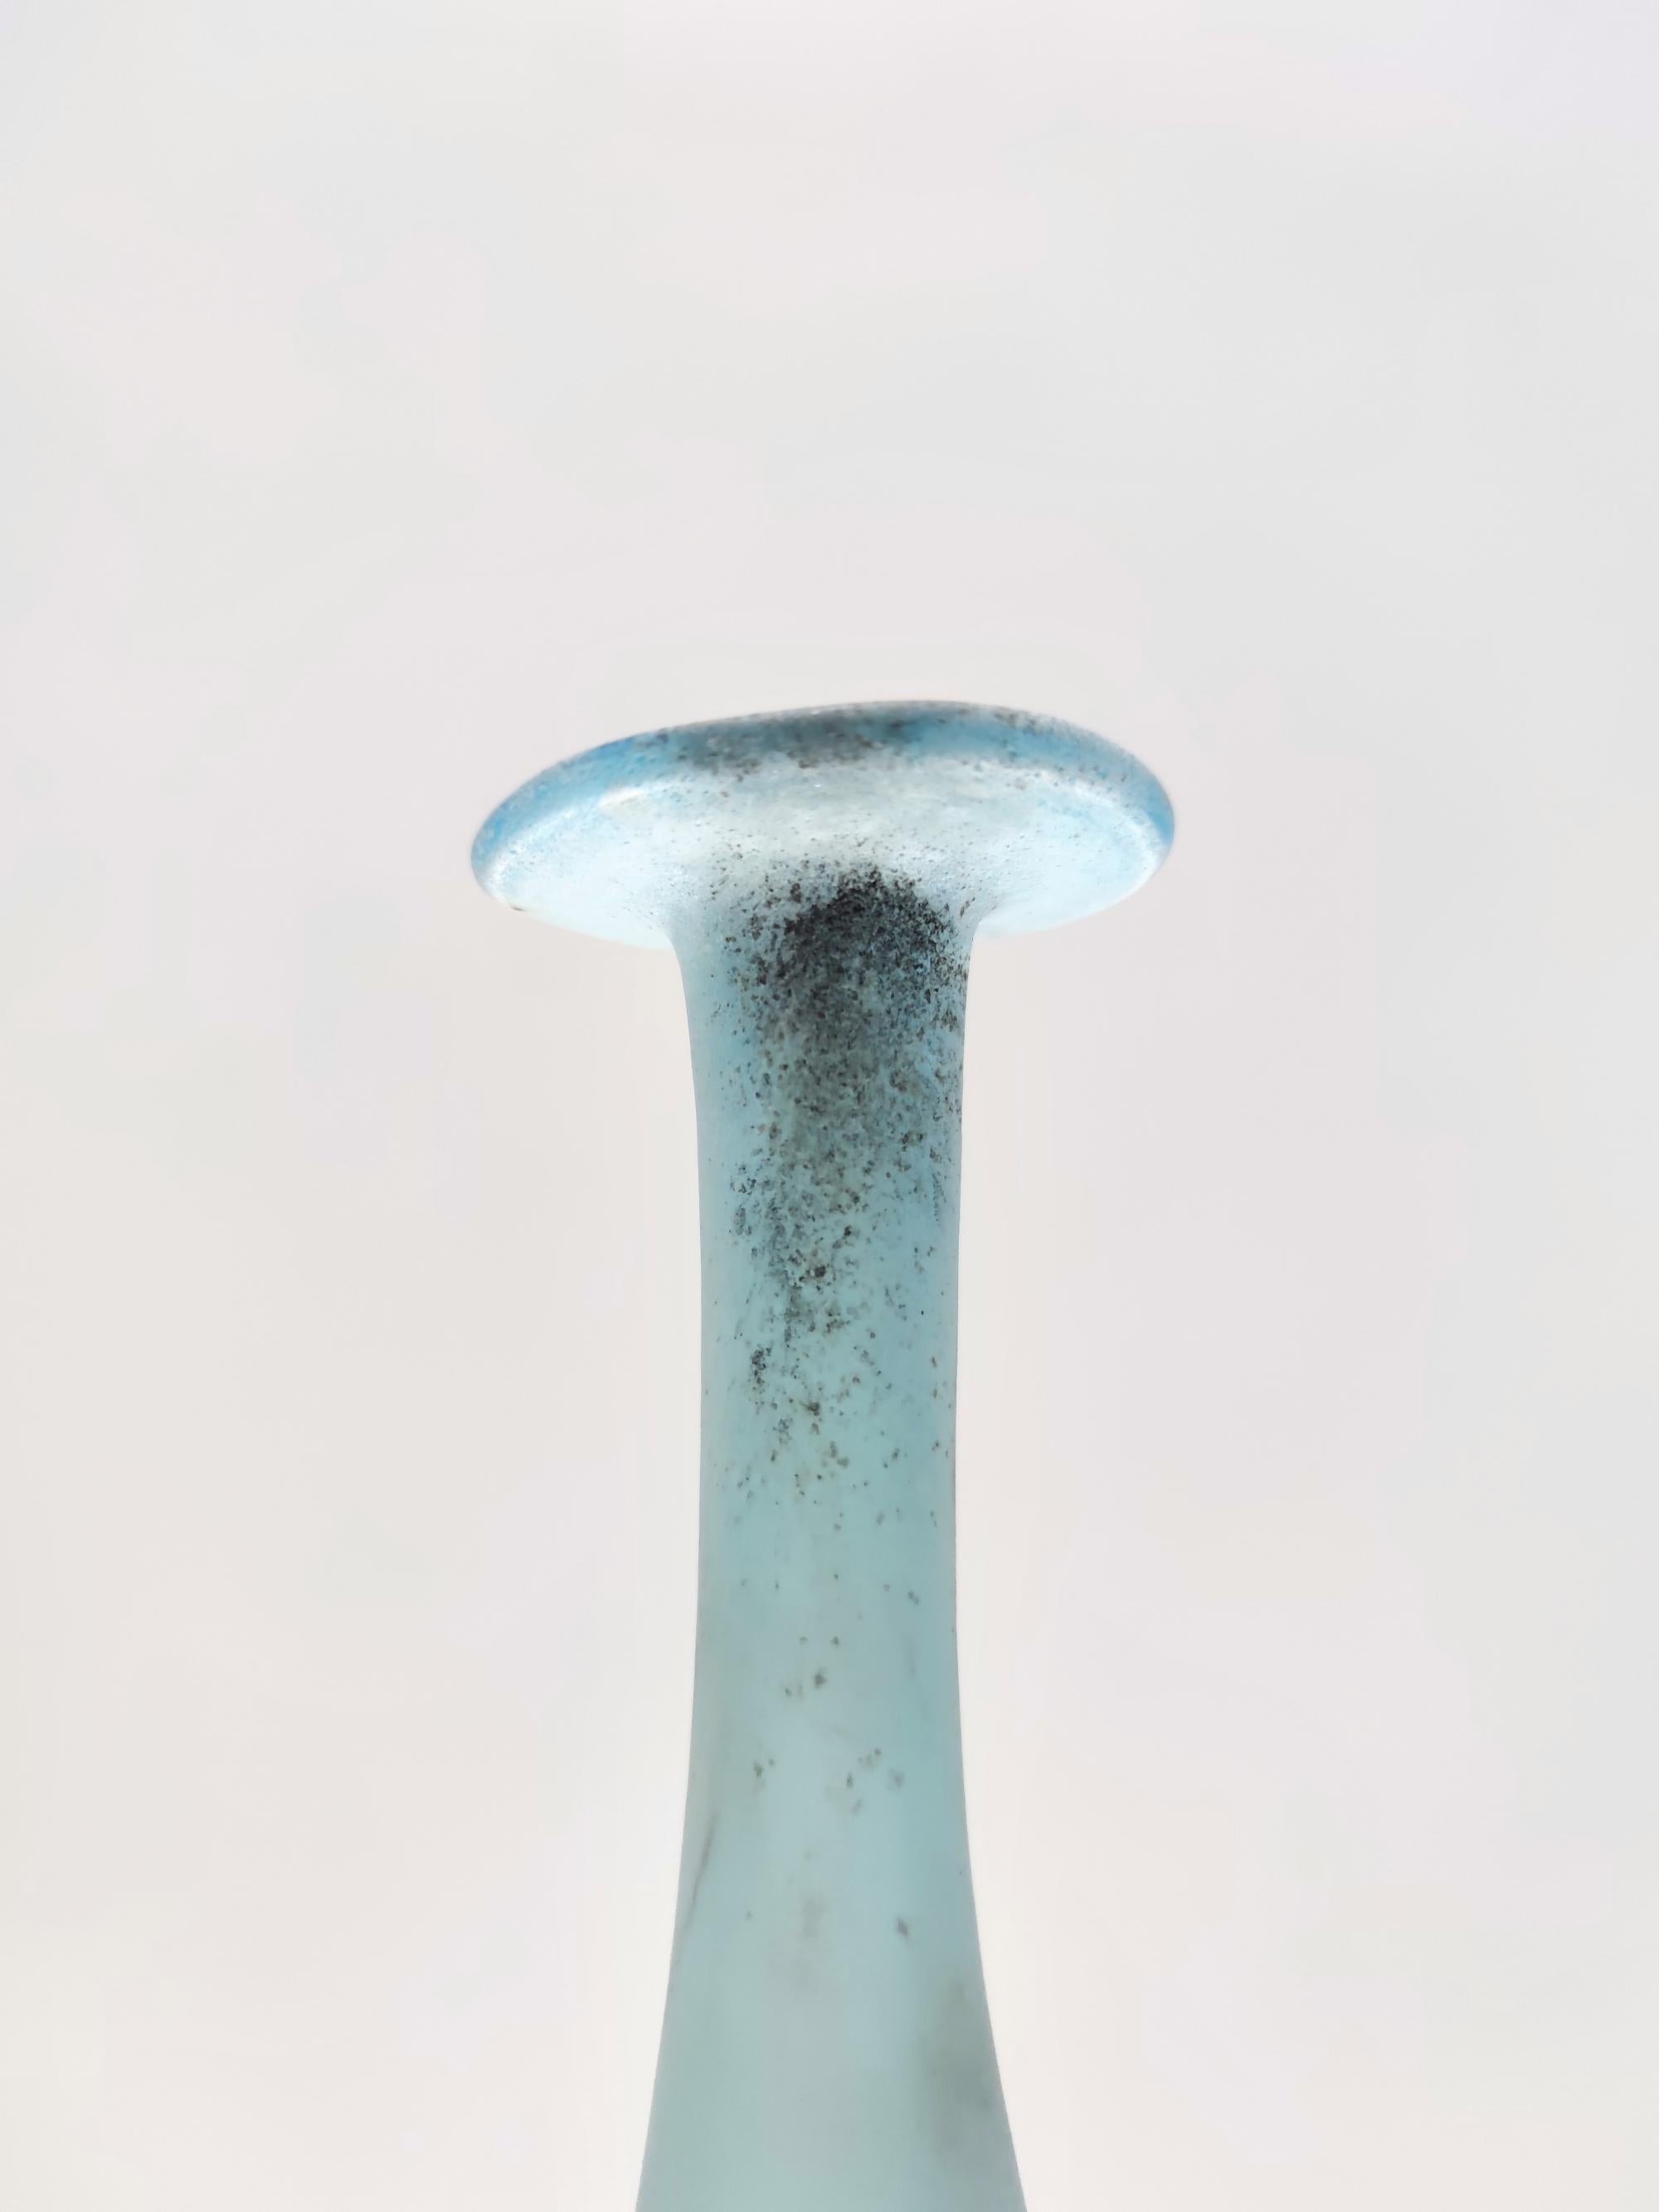 Light Blue Scavo Glass Bottle Vase by Gino Cenedese, Italy In Good Condition For Sale In Bresso, Lombardy